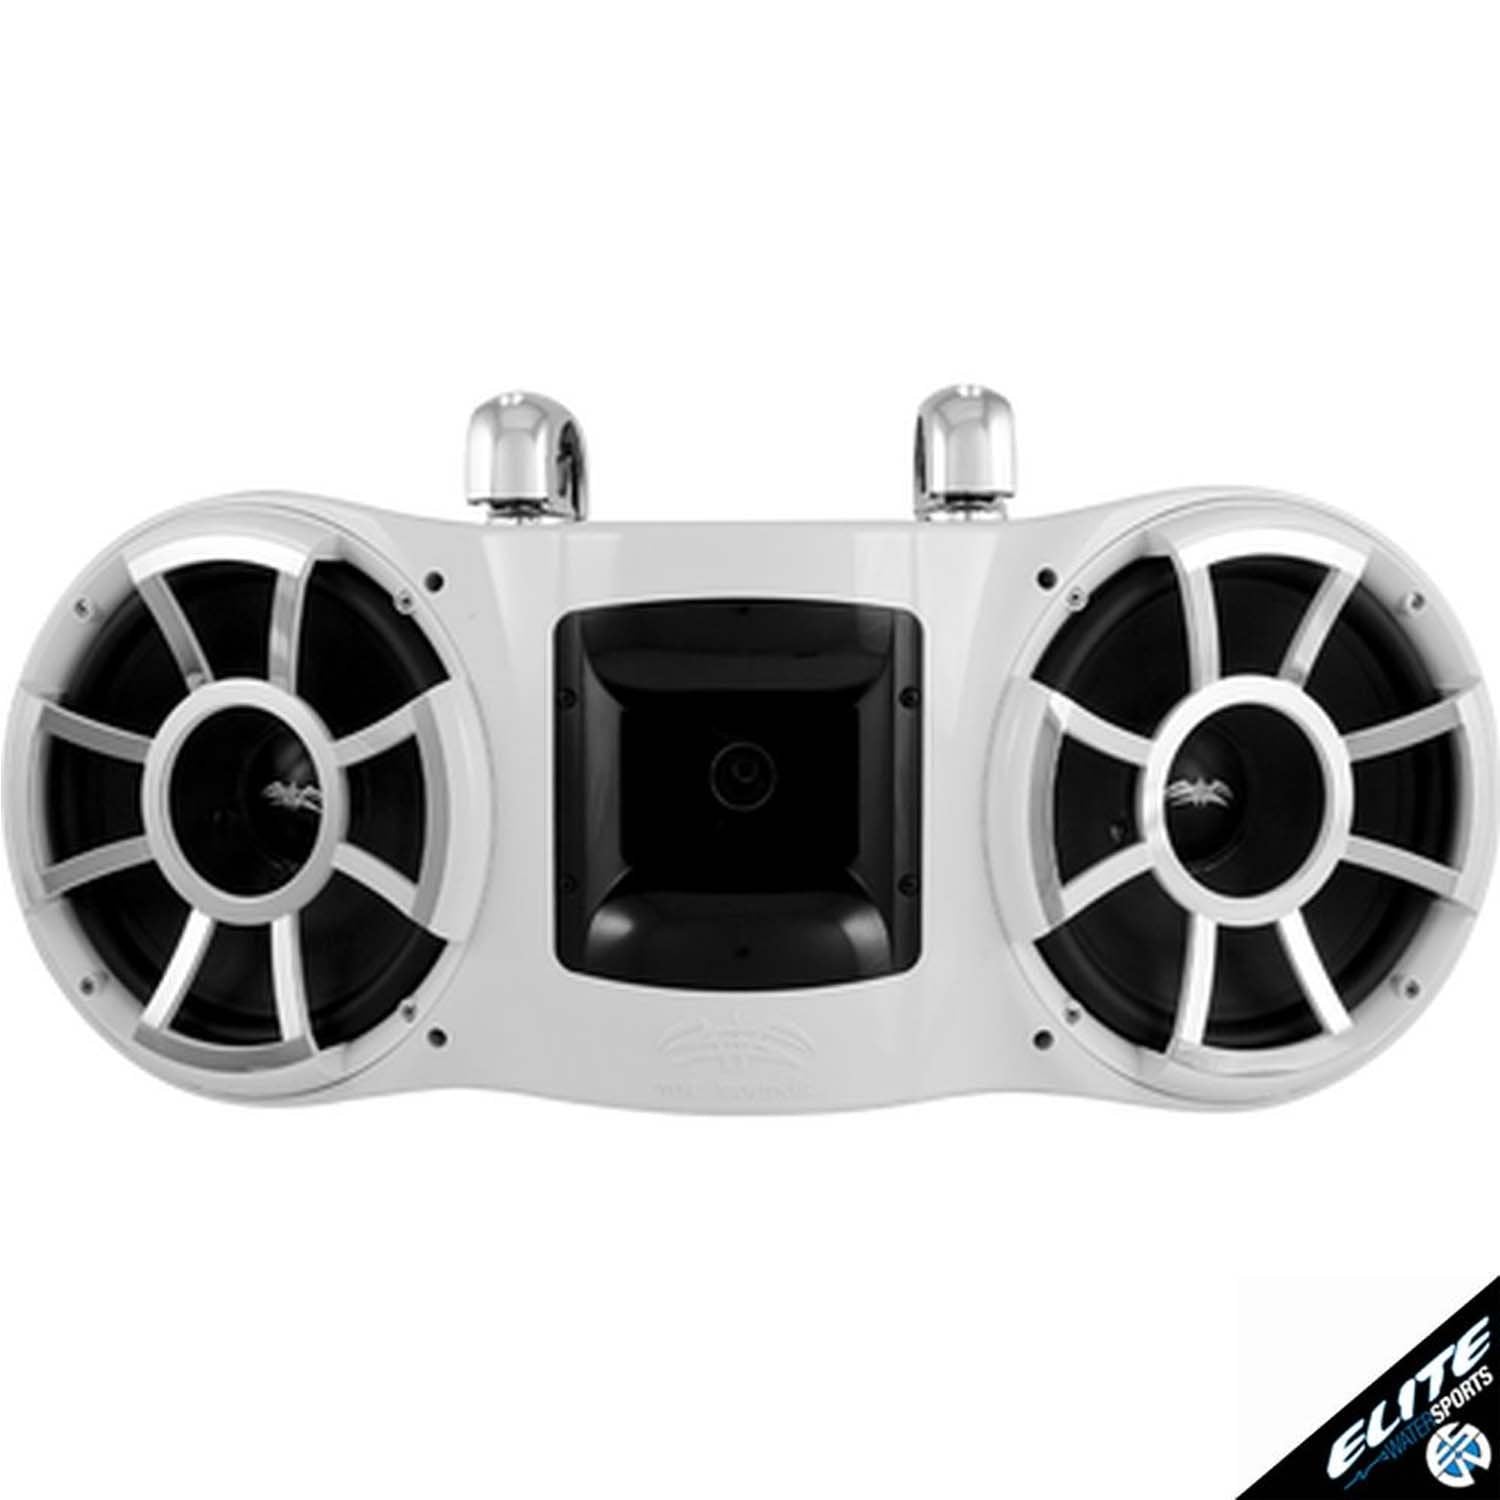 WETSOUNDS REV410 TOWER SPEAKER FIXED STAINLESS MOUNT